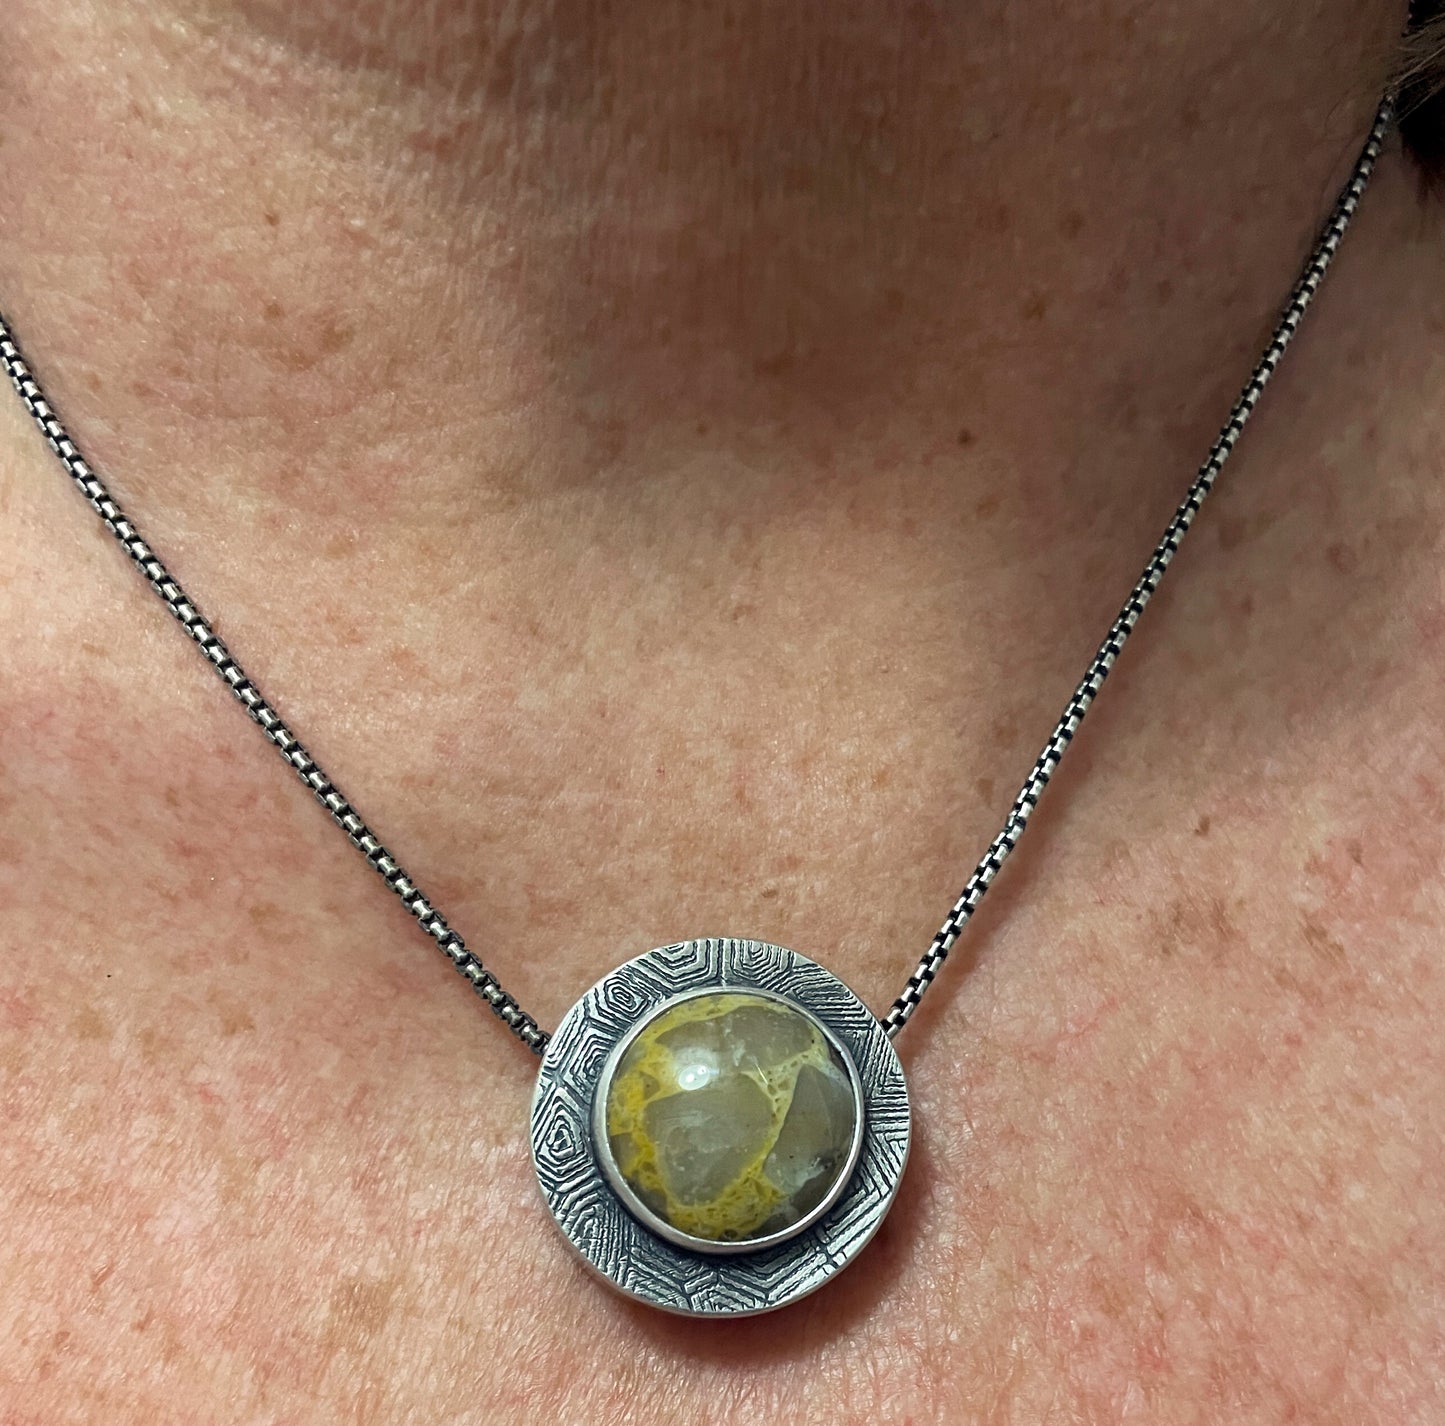 Hollow Formed Circular Pendant with Utah Conglomerate